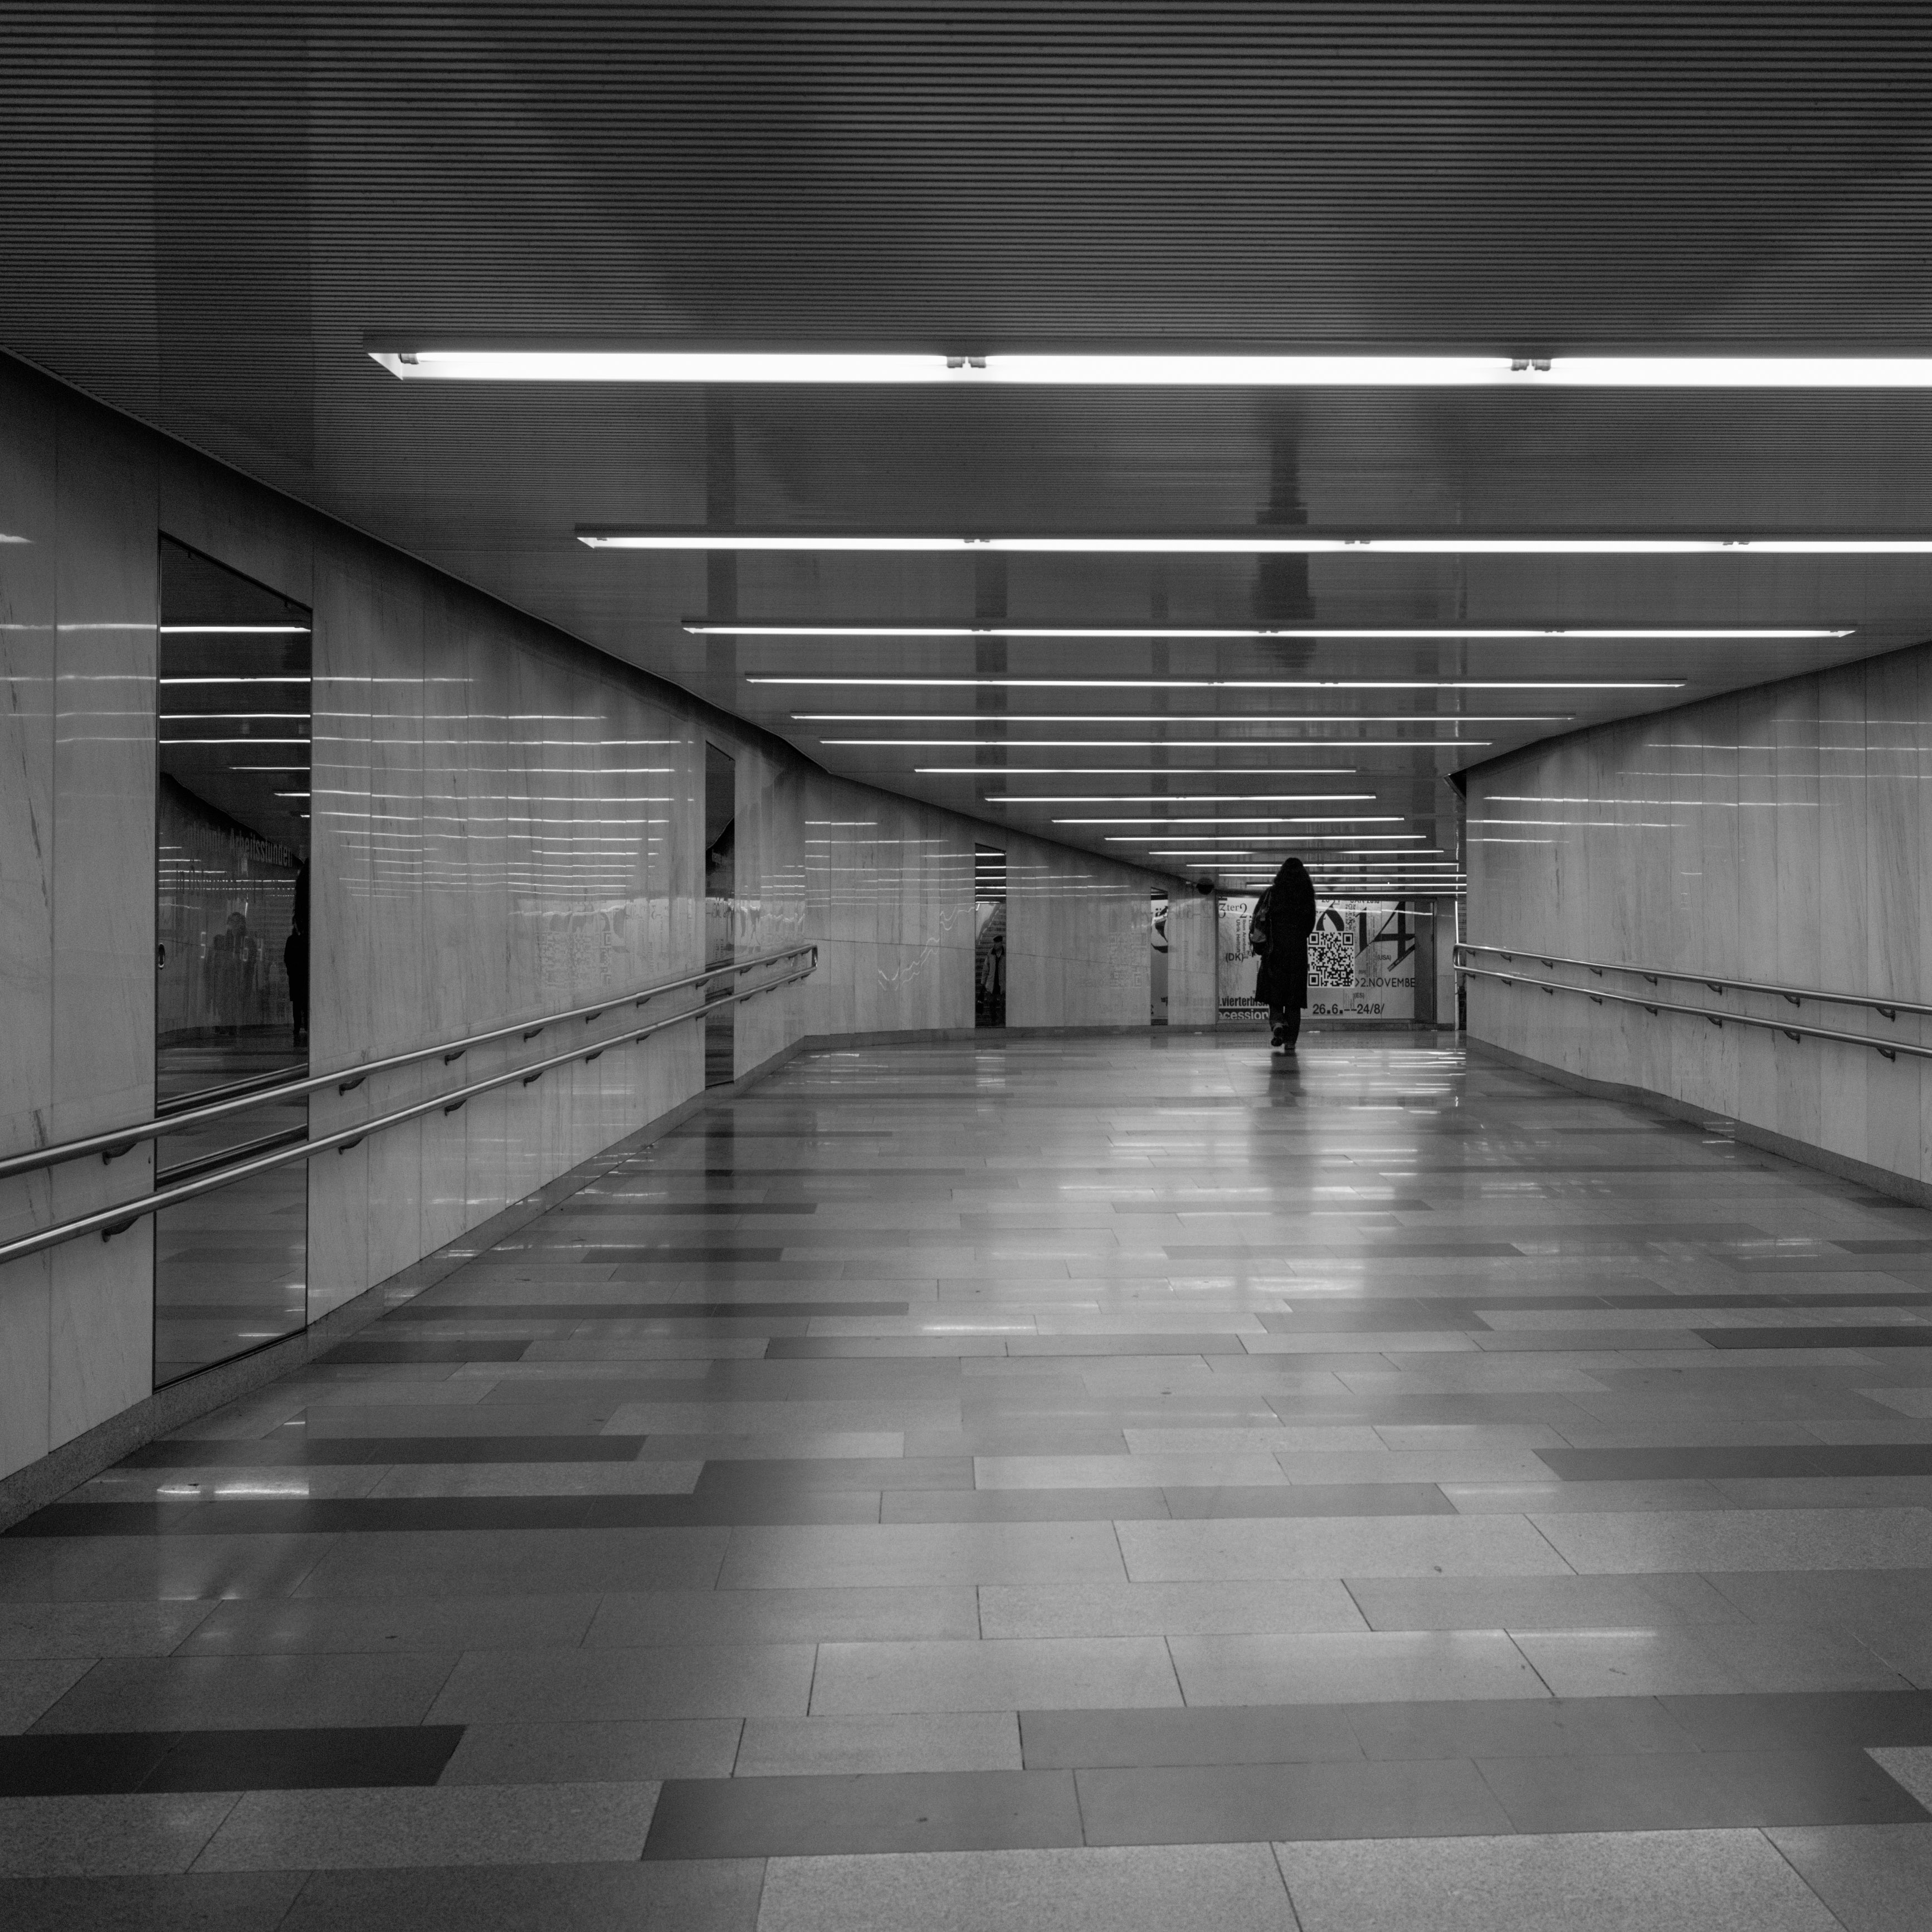 A passage at Somewhere (Innere Stadt, Austria) with Leica M Monochrom (Leica Summilux-M 35mm f/1.4 ASPH.) by Magnus L Andersson (photography.anderssoneklund.se) at 2013-11-19 13:51:35